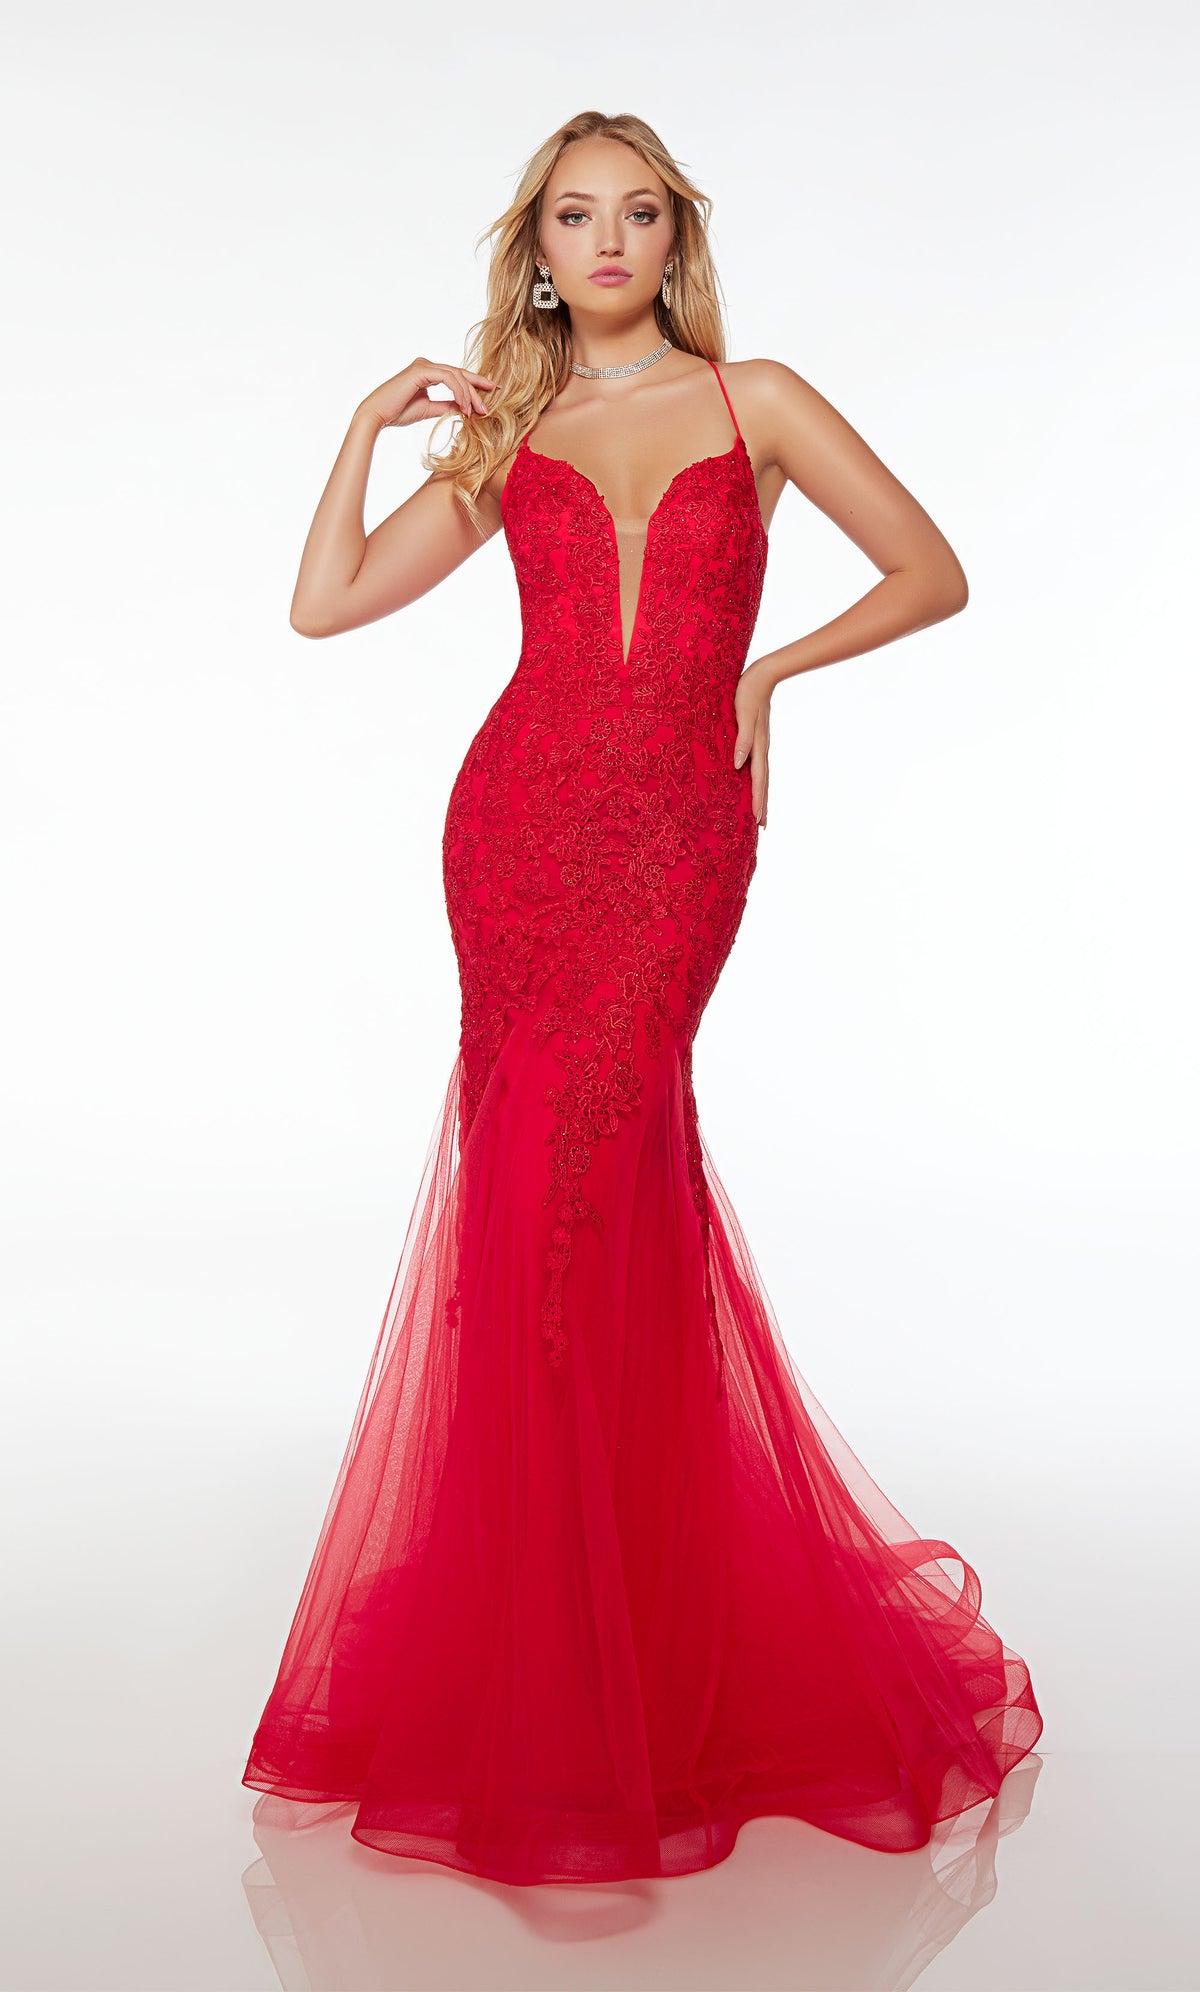 Red mermaid dress with plunging neckline, crisscross lace-up back, and an slight train crafted in tulle and adorned with delicate beaded lace for an elegant and captivating look.